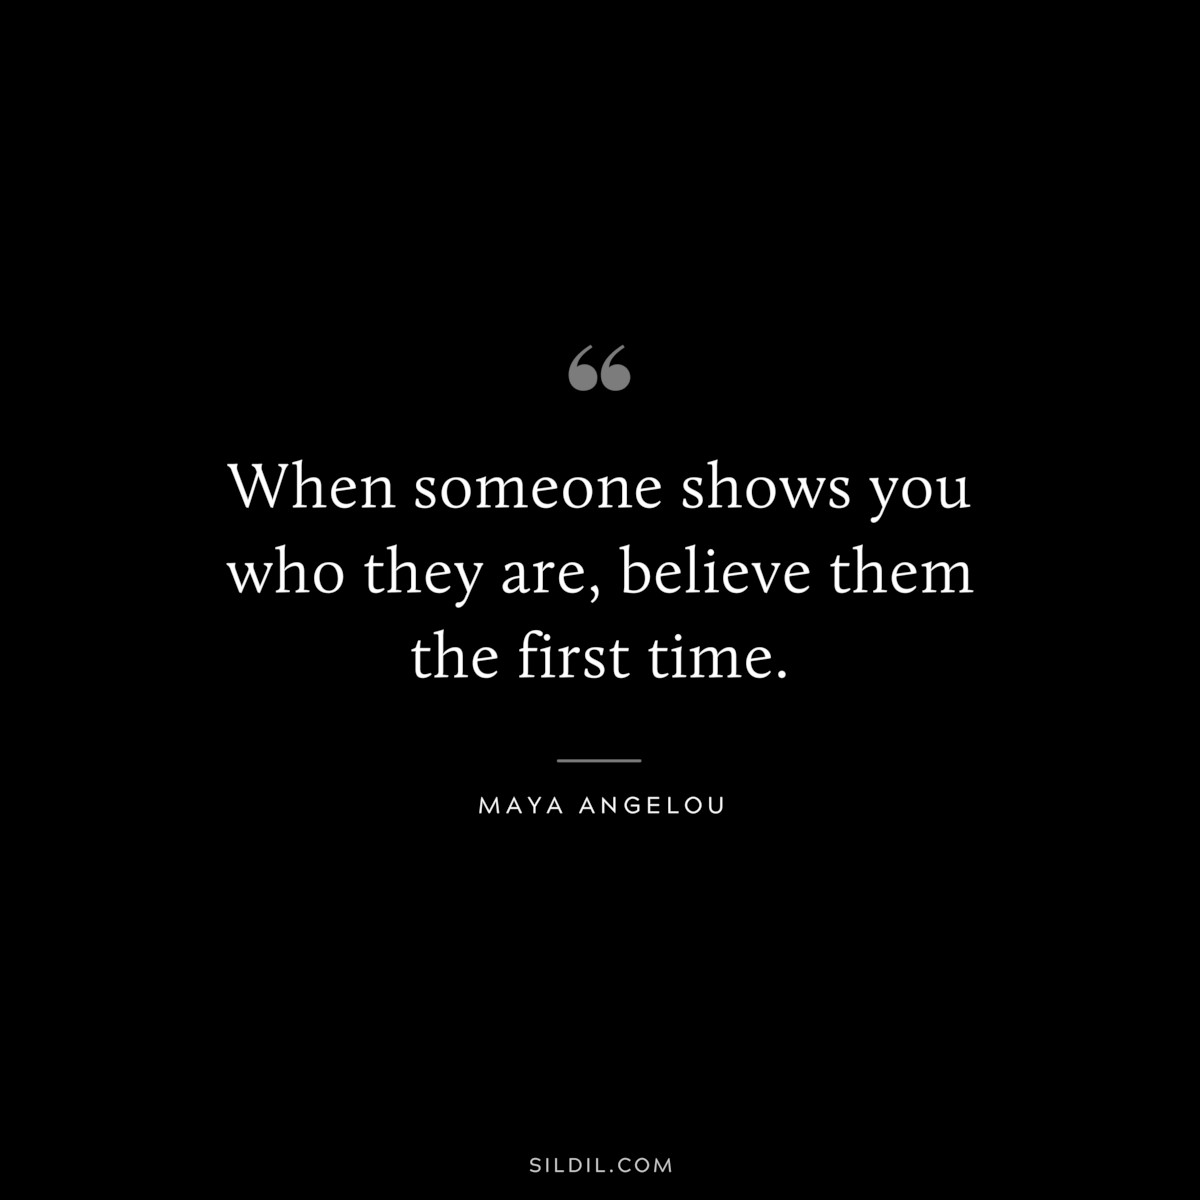 When someone shows you who they are, believe them the first time. ― Maya Angelou